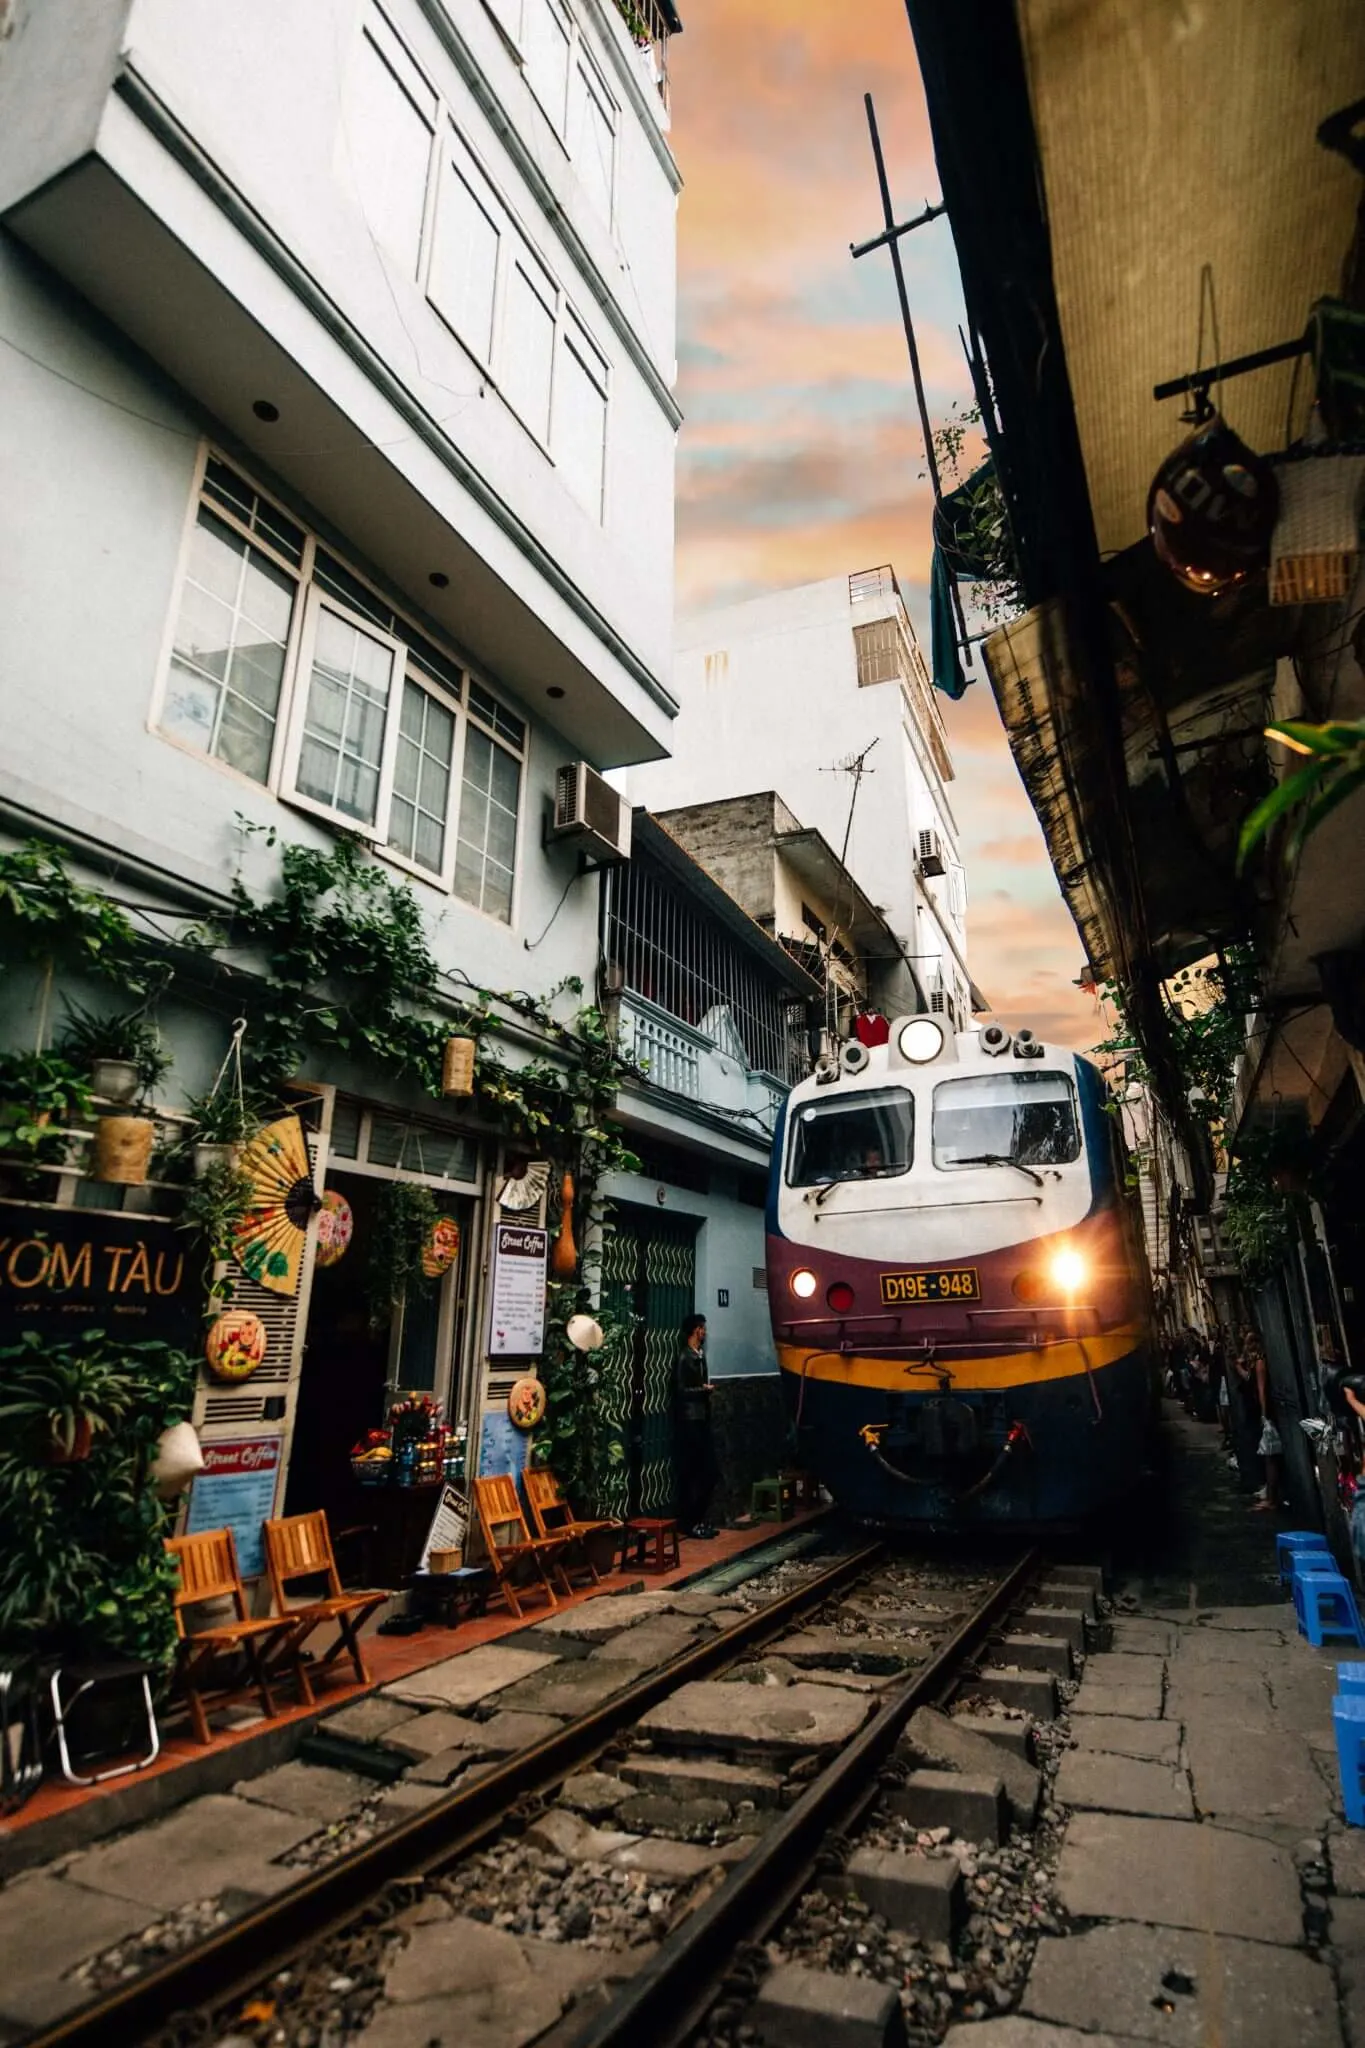 verraad Hechting Zuidwest What You Need to Know About 'Sleeping' on Vietnam's Overnight Trains